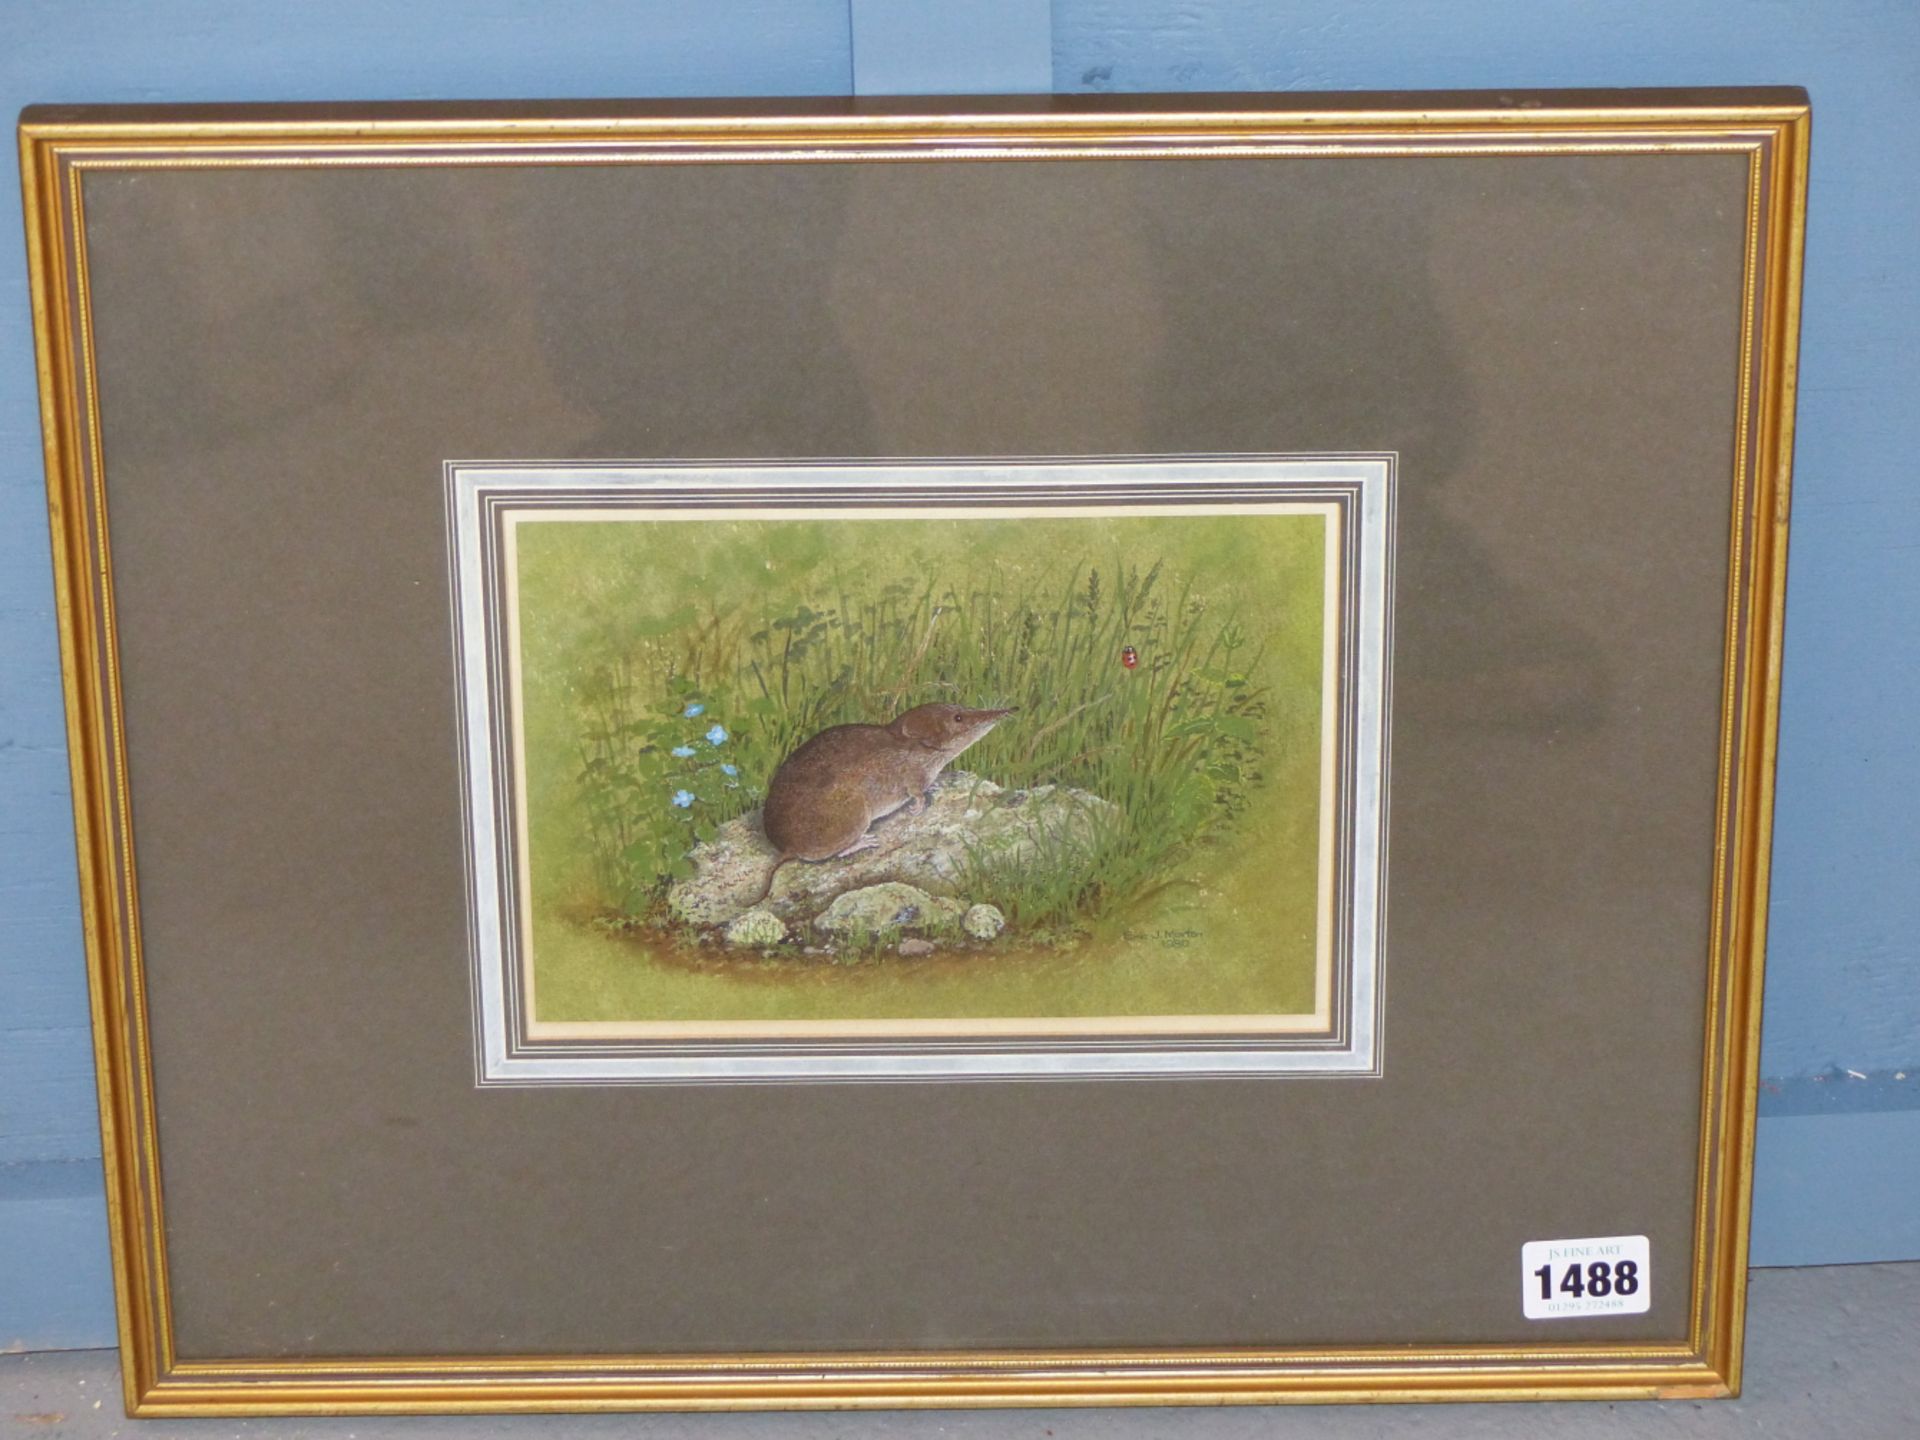 ERIC J. MORTON (20th/21st C. ENGLISH SCHOOL) ARR. A VOLE AND A LADYBIRD, PENCIL SIGNED, WATERCOLOUR. - Image 6 of 6